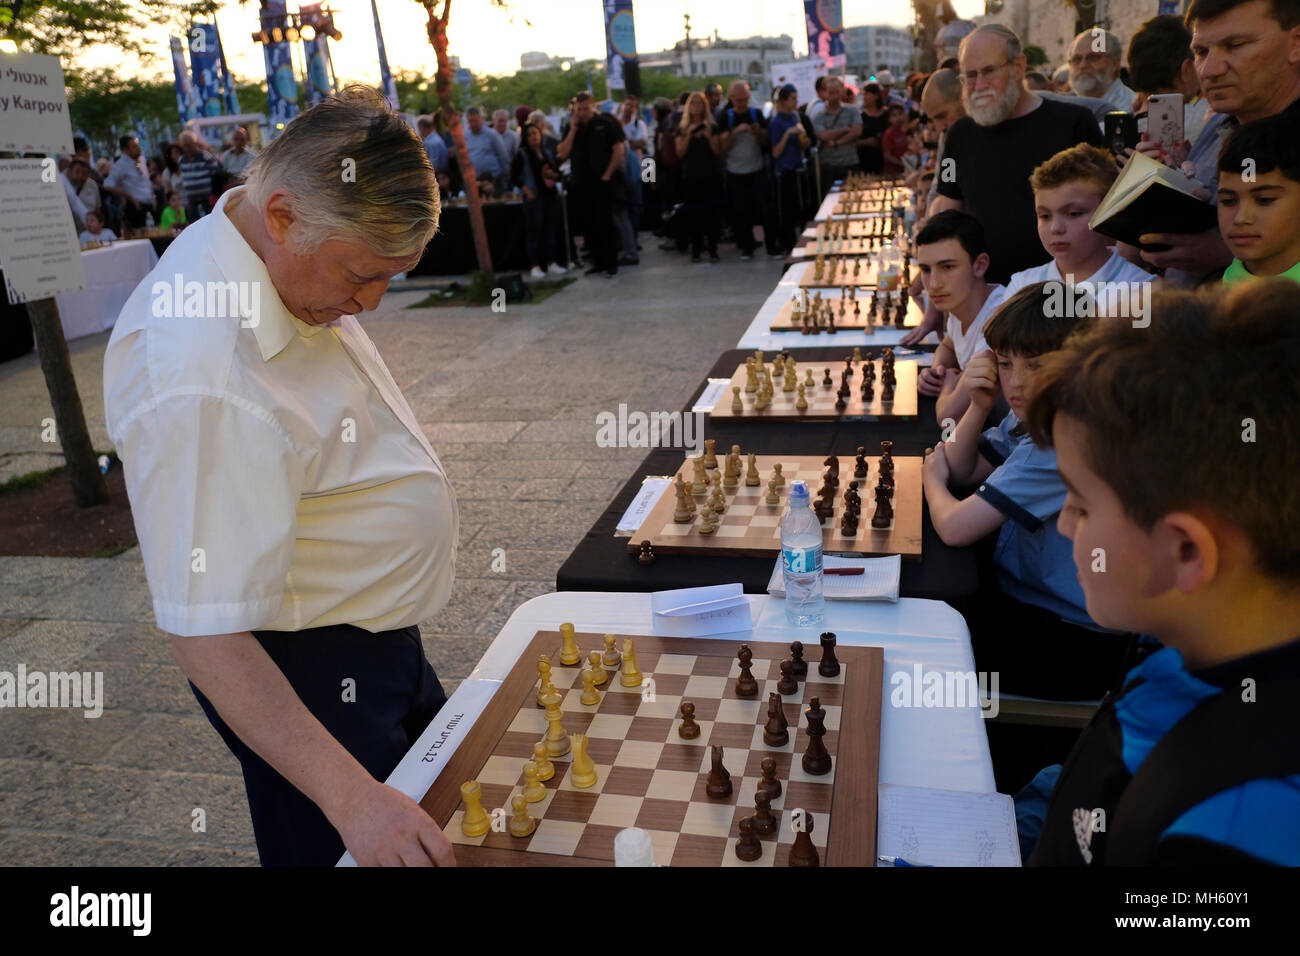 World chess champion Anatoly Karpov left with his wife Irina right and son  Anatoly center at home Stock Photo - Alamy